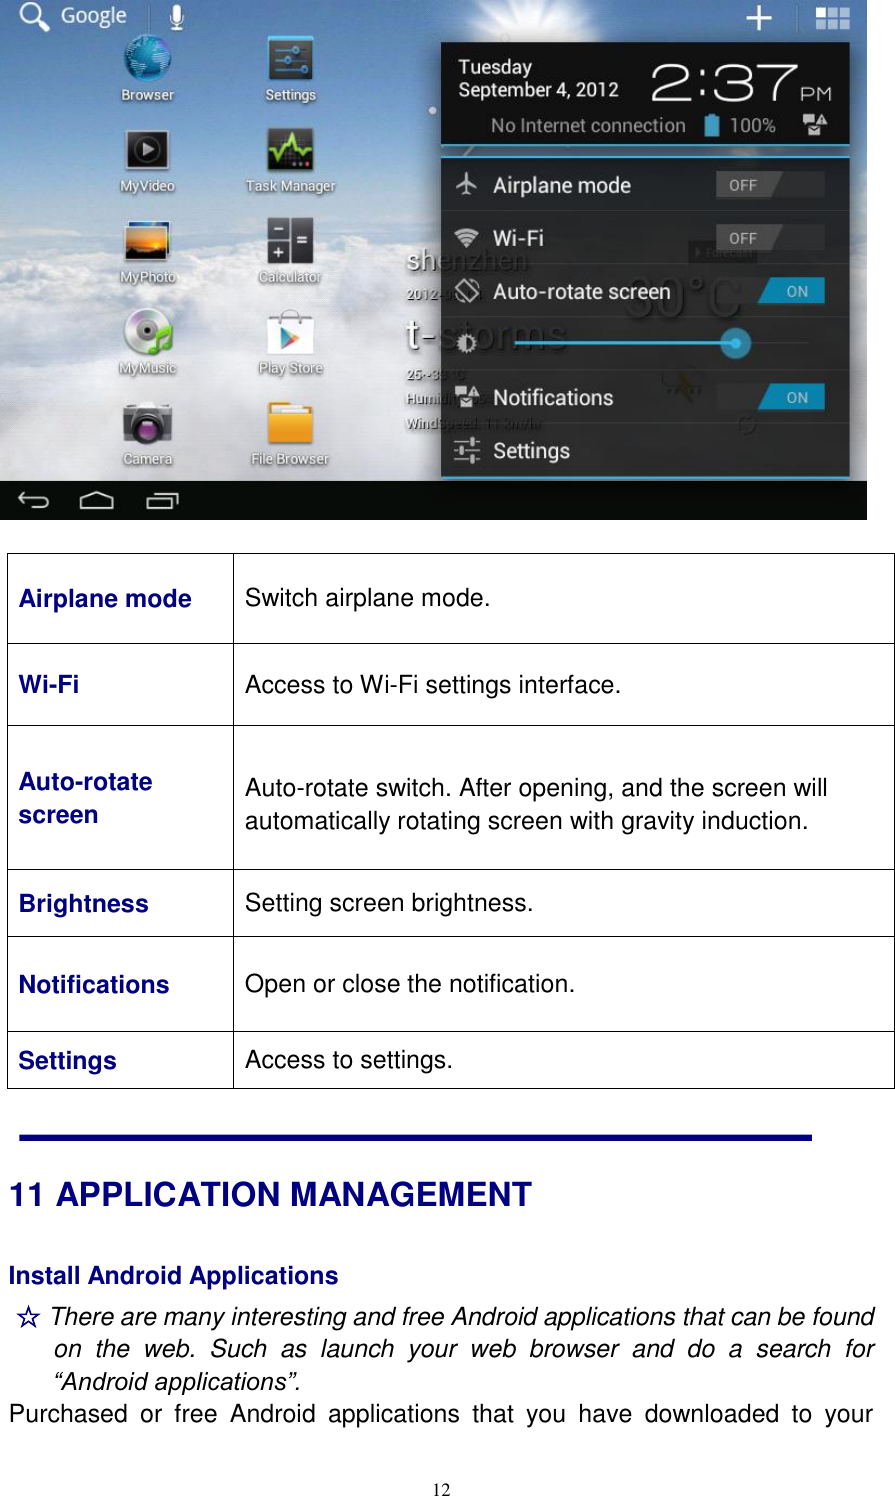  12   Airplane mode Switch airplane mode. Wi-Fi Access to Wi-Fi settings interface. Auto-rotate screen   Auto-rotate switch. After opening, and the screen will automatically rotating screen with gravity induction.  Brightness Setting screen brightness. Notifications Open or close the notification. Settings Access to settings. 11 APPLICATION MANAGEMENT Install Android Applications   ☆ There are many interesting and free Android applications that can be found on  the  web.  Such  as  launch  your  web  browser  and  do  a  search  for “Android applications”.   Purchased  or  free  Android  applications  that  you  have  downloaded  to  your 